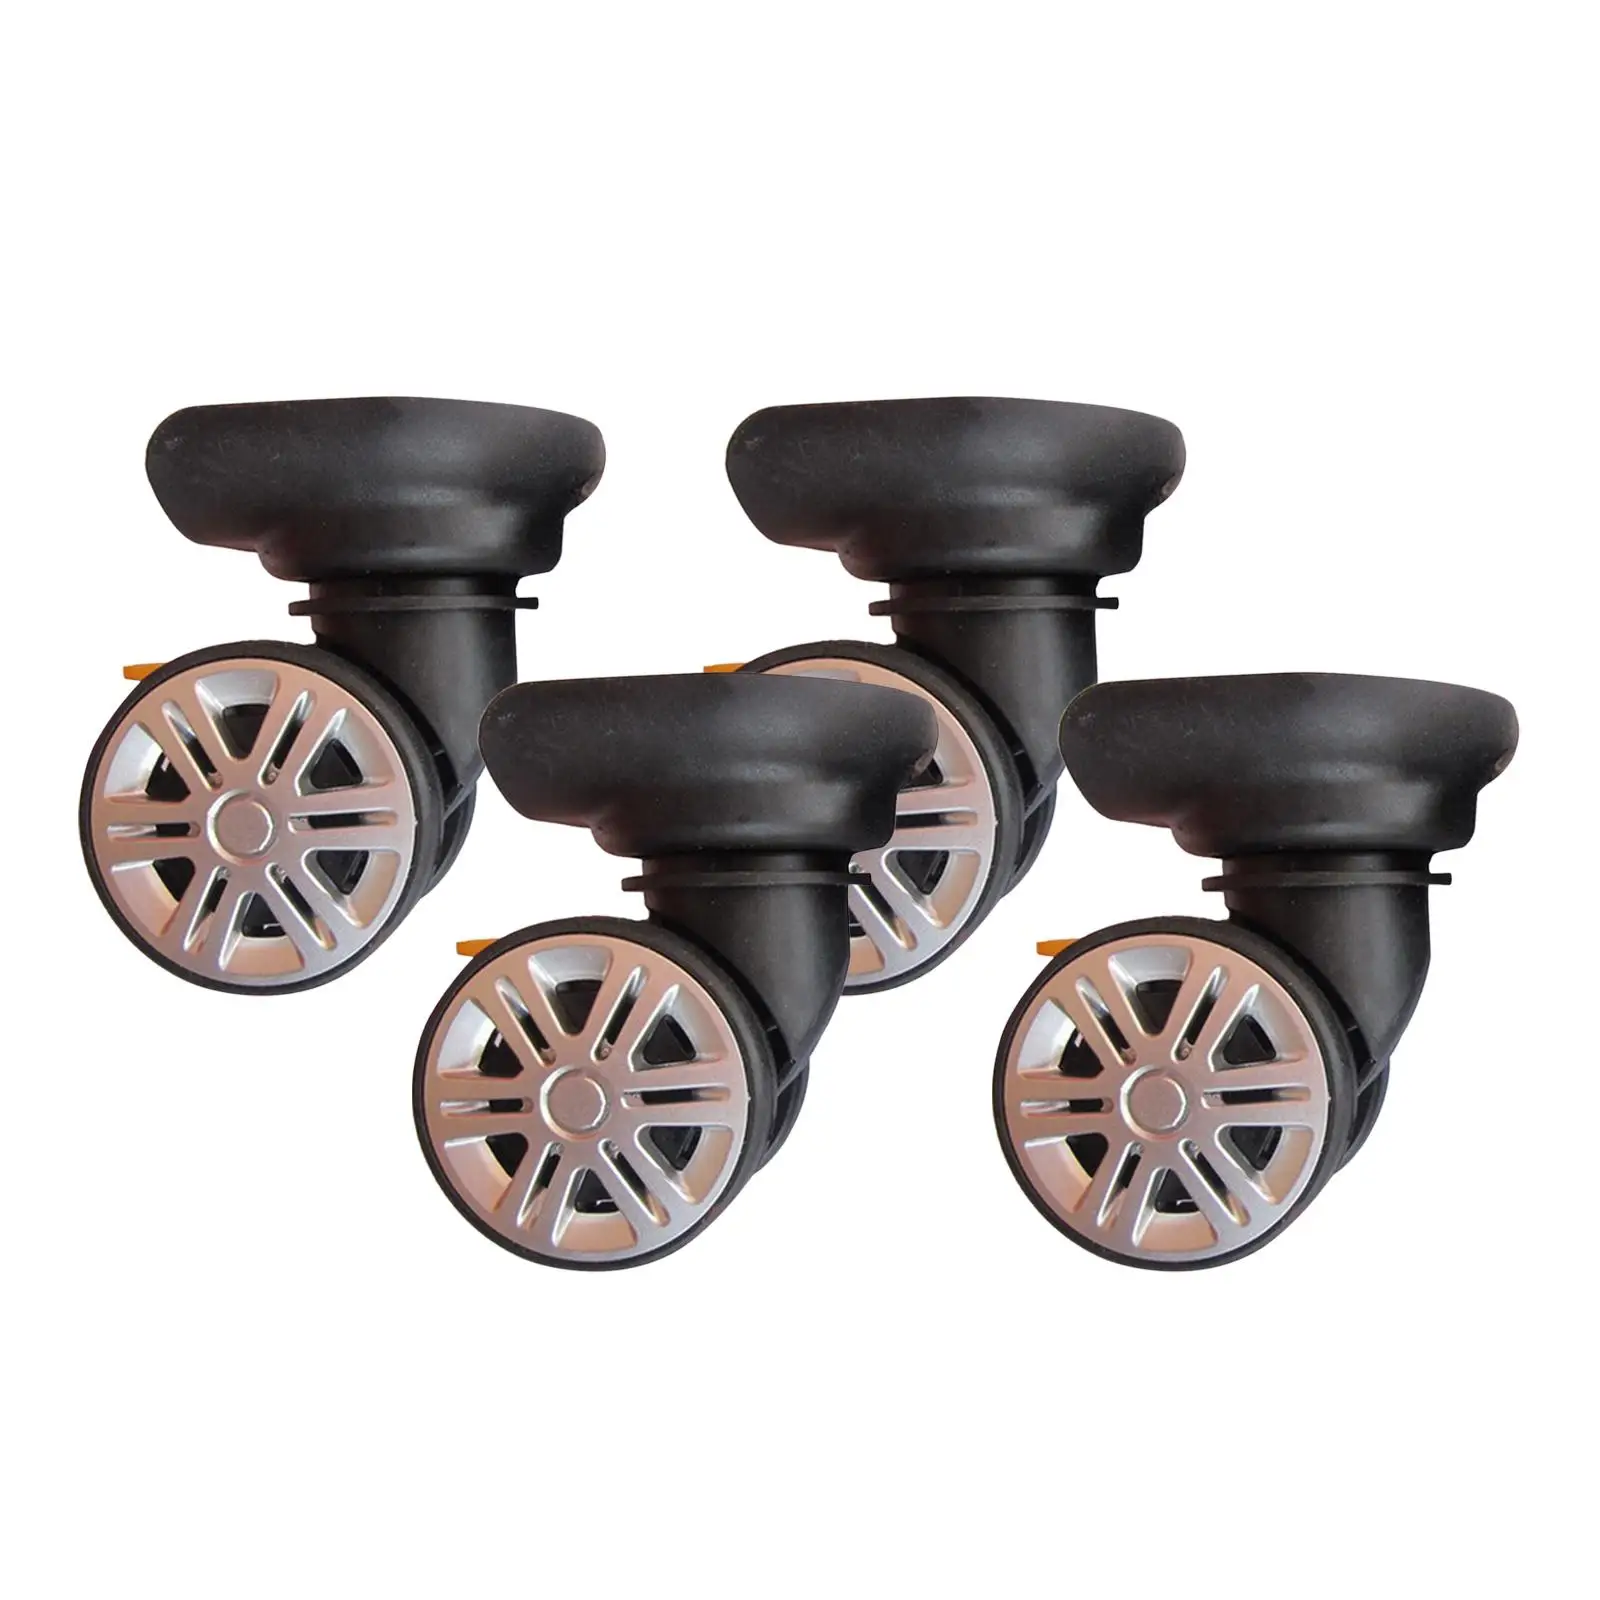 4 Pieces Suitcase Replacement Wheels Silent Lightweight Suitcase Swivel Wheels for Shopping Carts Trolley Case Suitcases